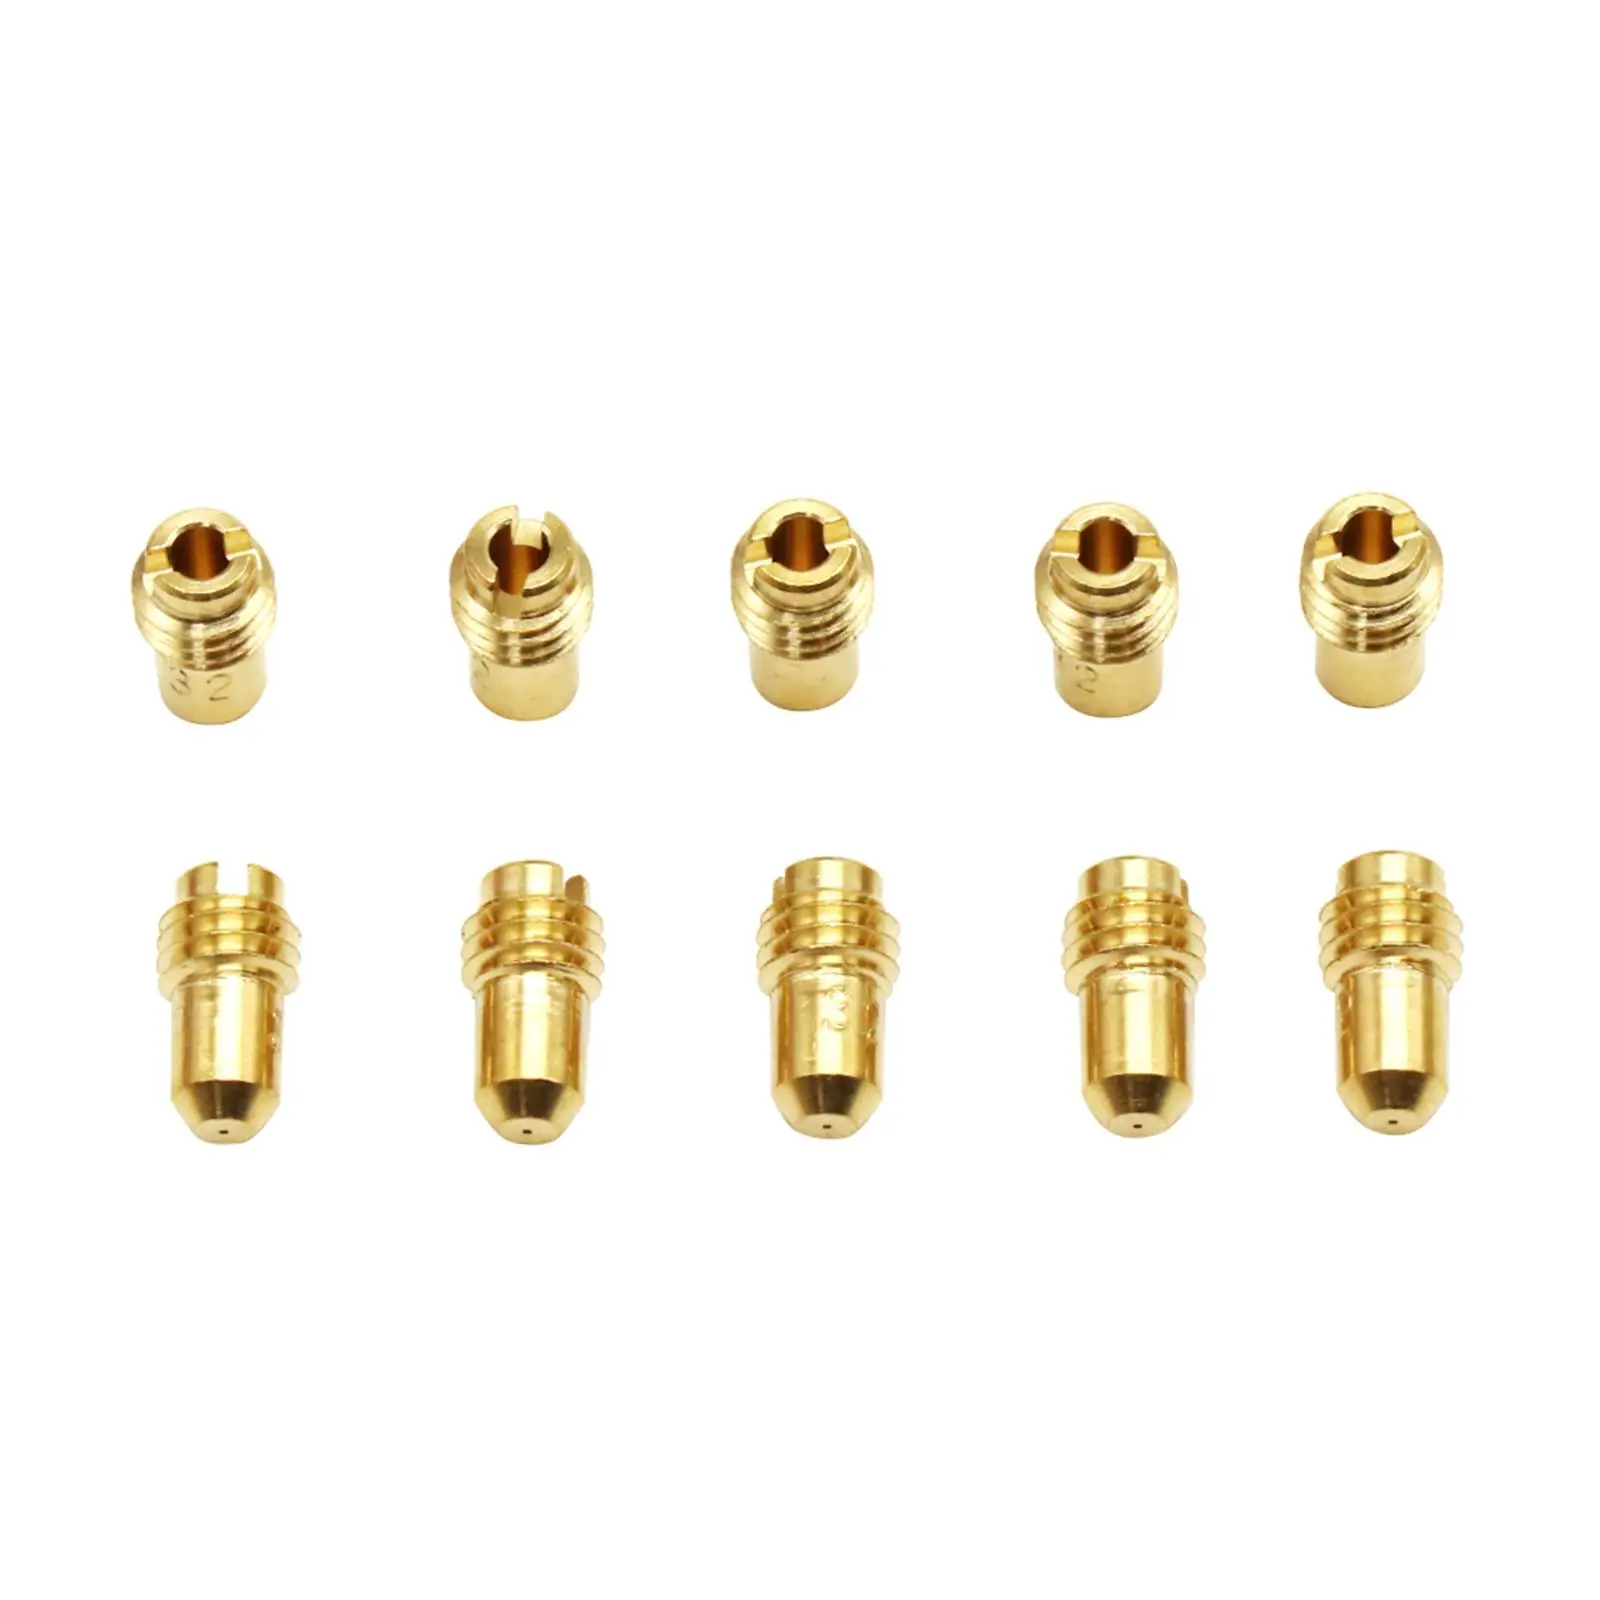 10 Pieces Slow Pilot Idle Jet High Strength Carburetor Main Jet for Dellorto Phbg Durable Easily to Install Attachment